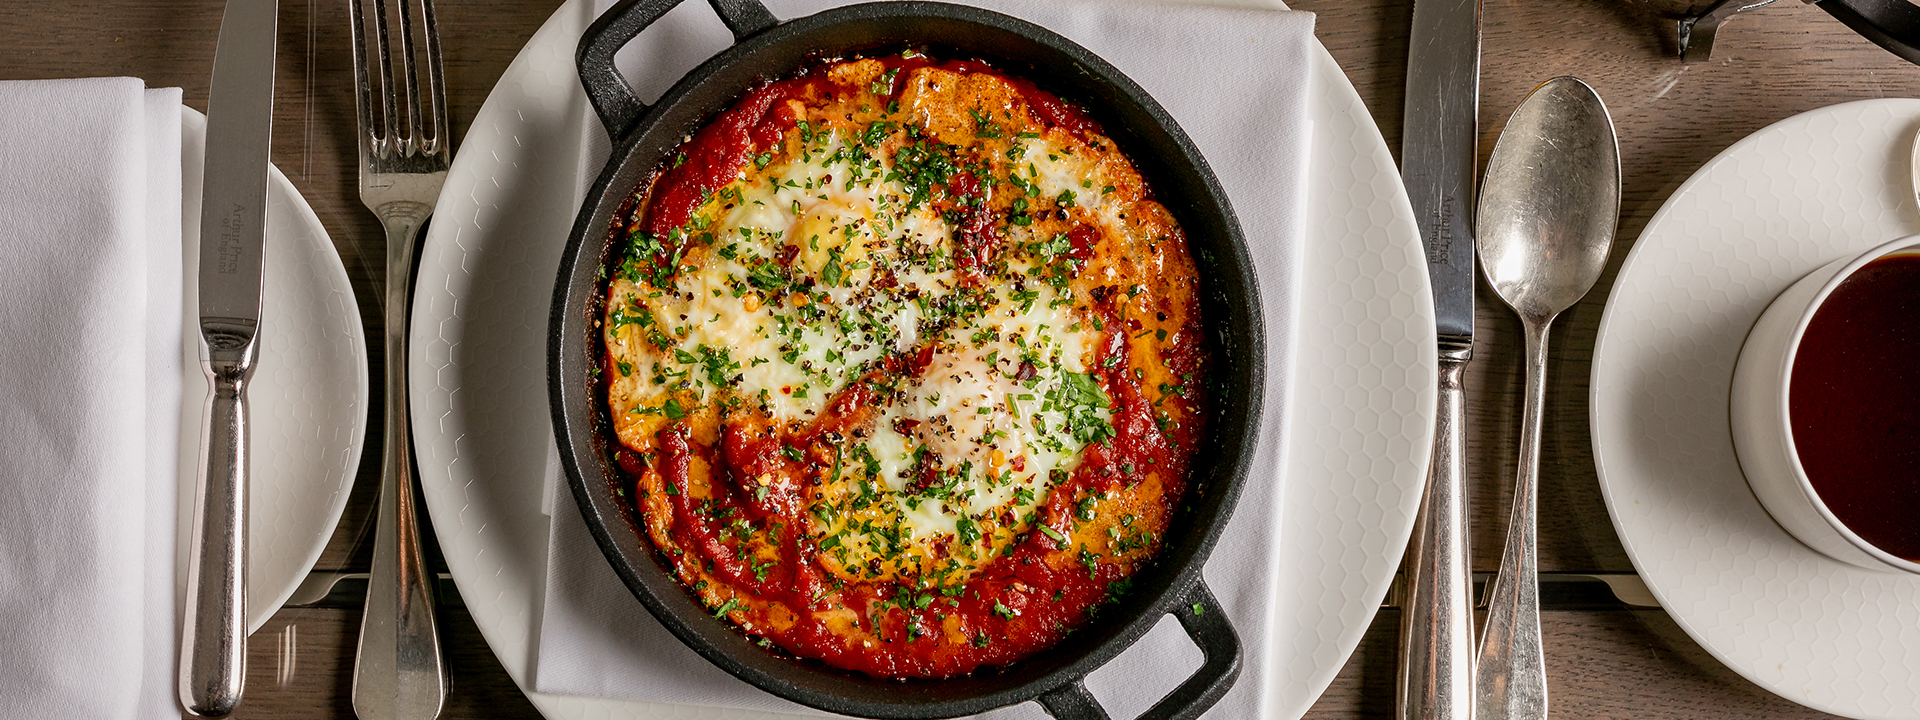 Shakshuka, a hot dish with aromatic tomato sauce that can be ordered for breakfast in the Collins Room.